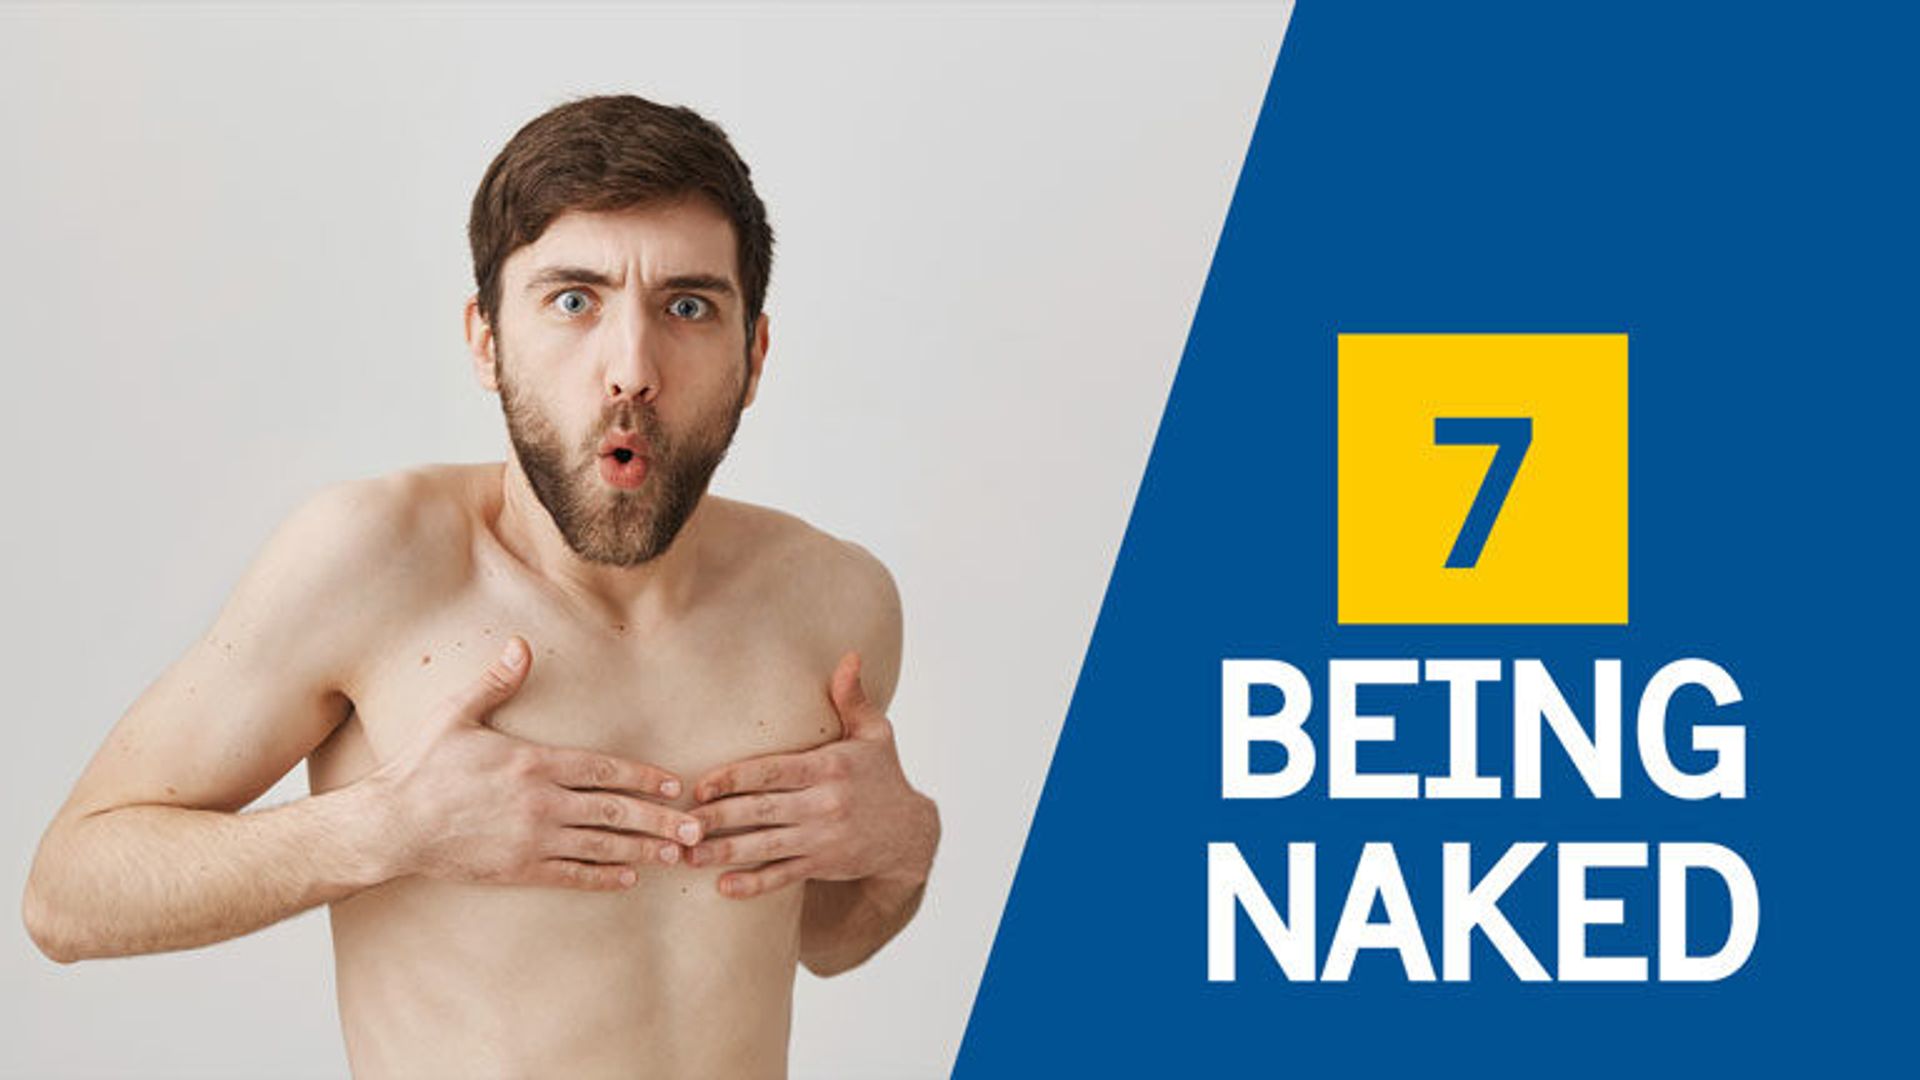 07 Being Naked - Essentials if you are coming to Sweden